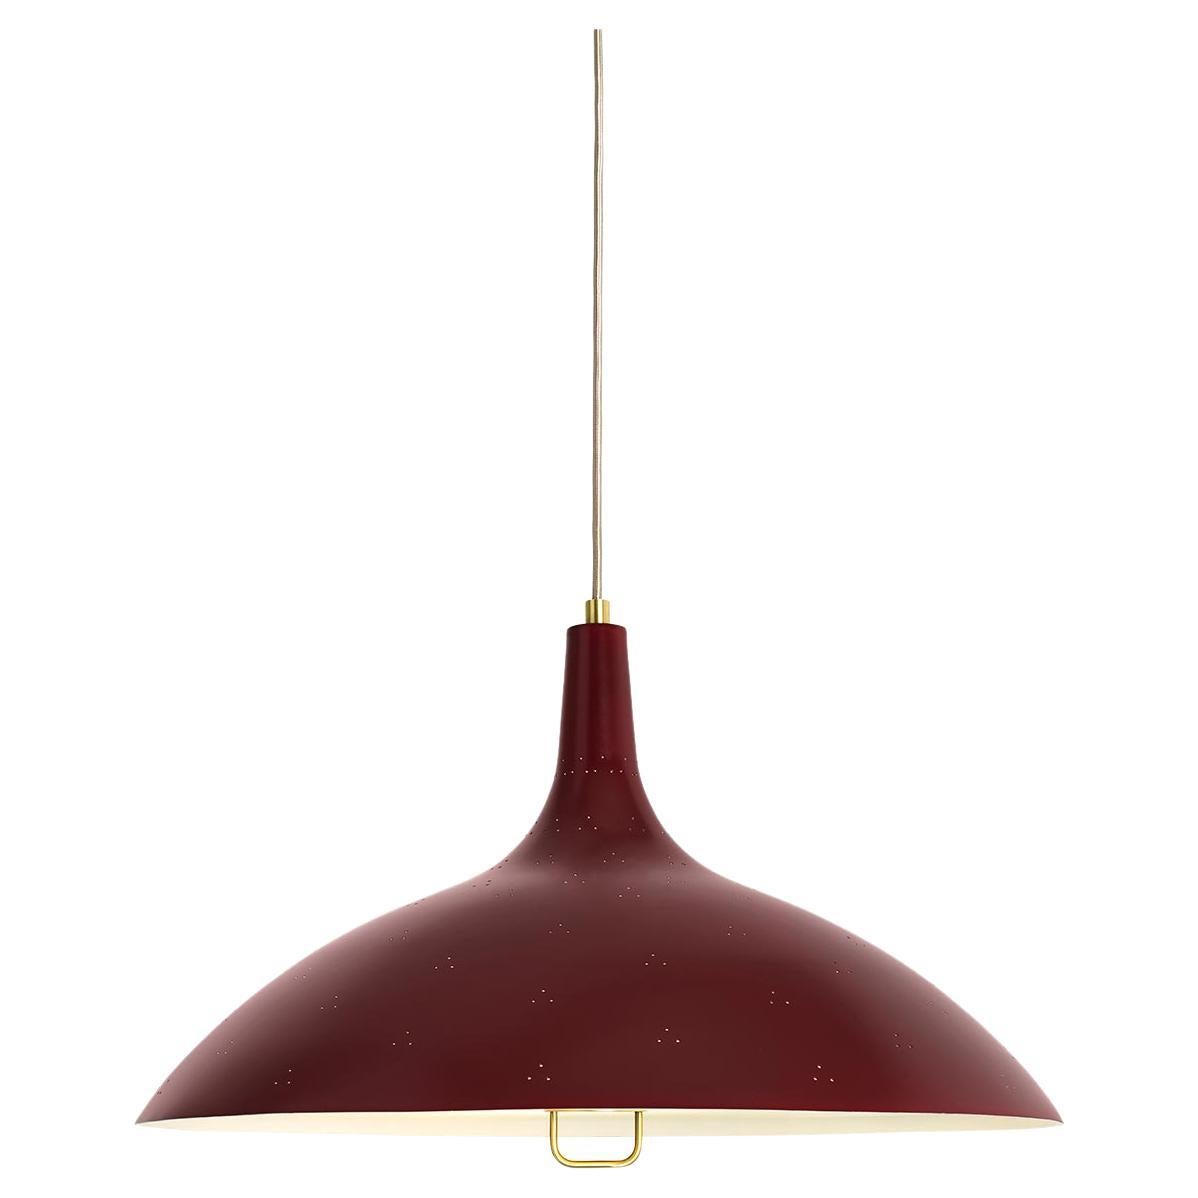 The 1965 Pendant was originally designed by Paavo Tynell in 1947. Like many of his bestknown designs, the pendant was designed for the Finland House in New York – one of the most ambitious and successful projects of all time to showcase Finnish